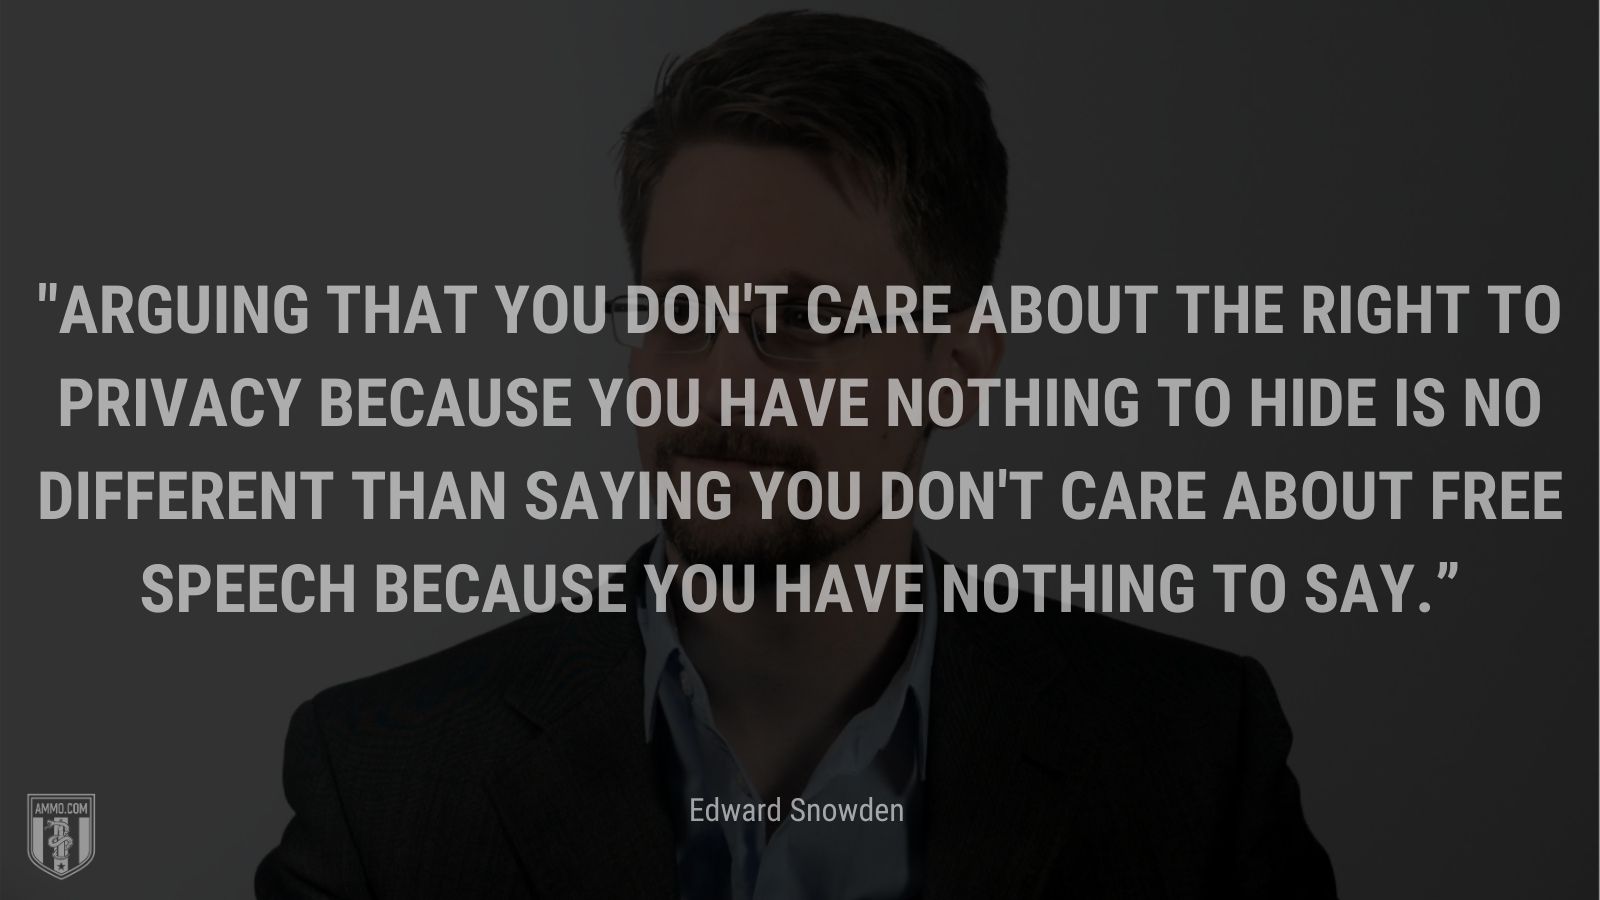 “Arguing that you don't care about the right to privacy because you have nothing to hide is no different than saying you don't care about free speech because you have nothing to say.” - Edward Snowden